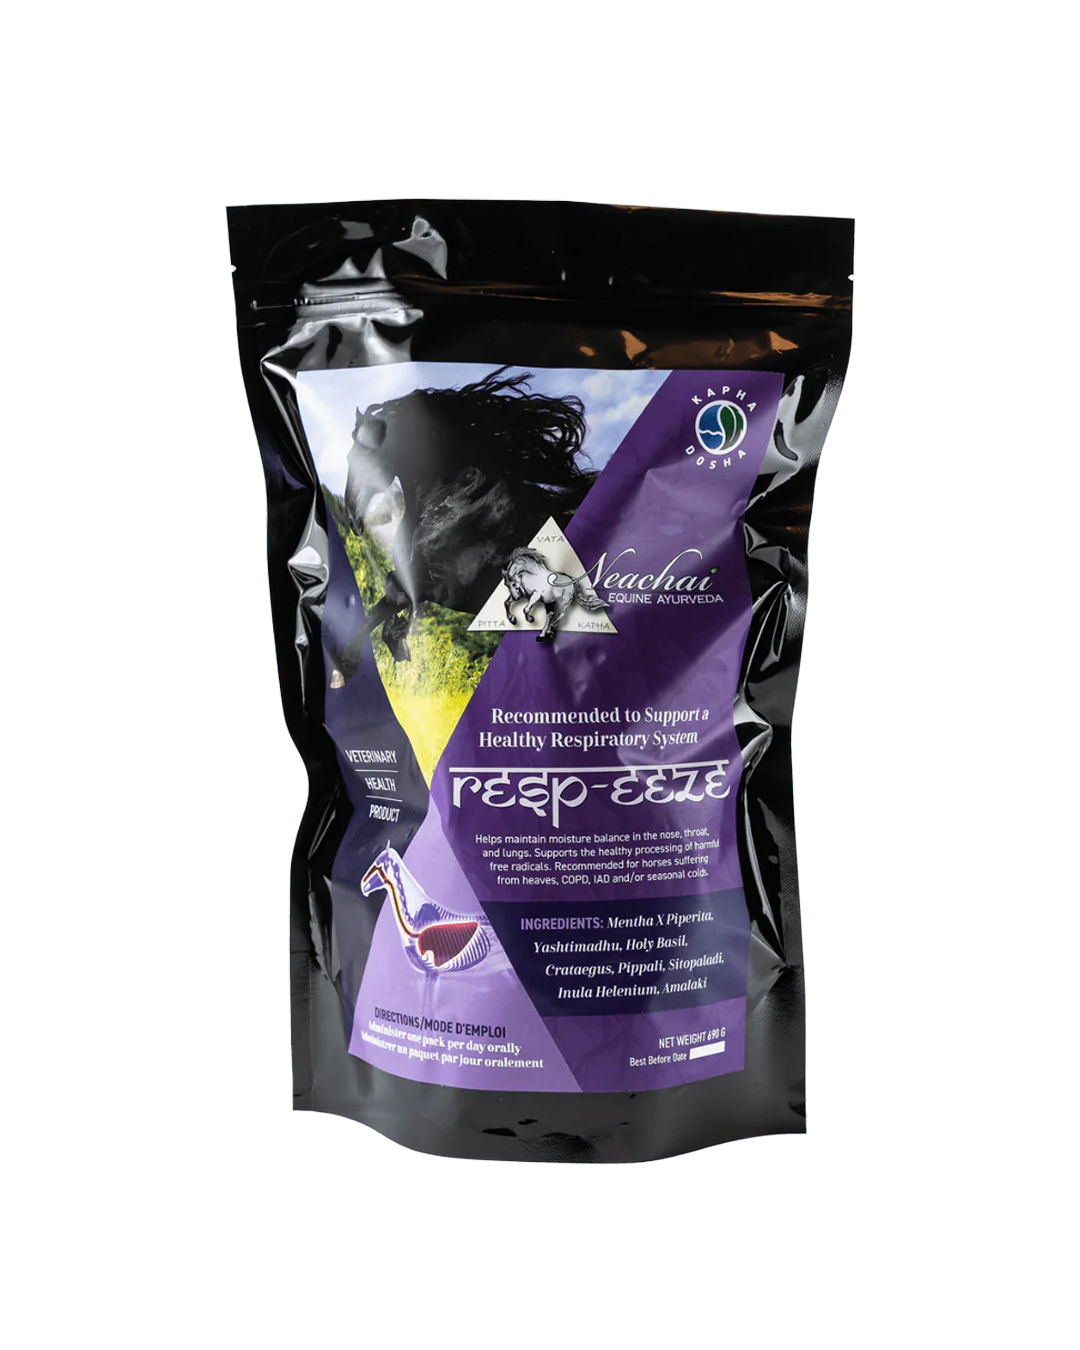 Resp-eeze Herbal Supplement Neachai - Equestrian Fashion Outfitters